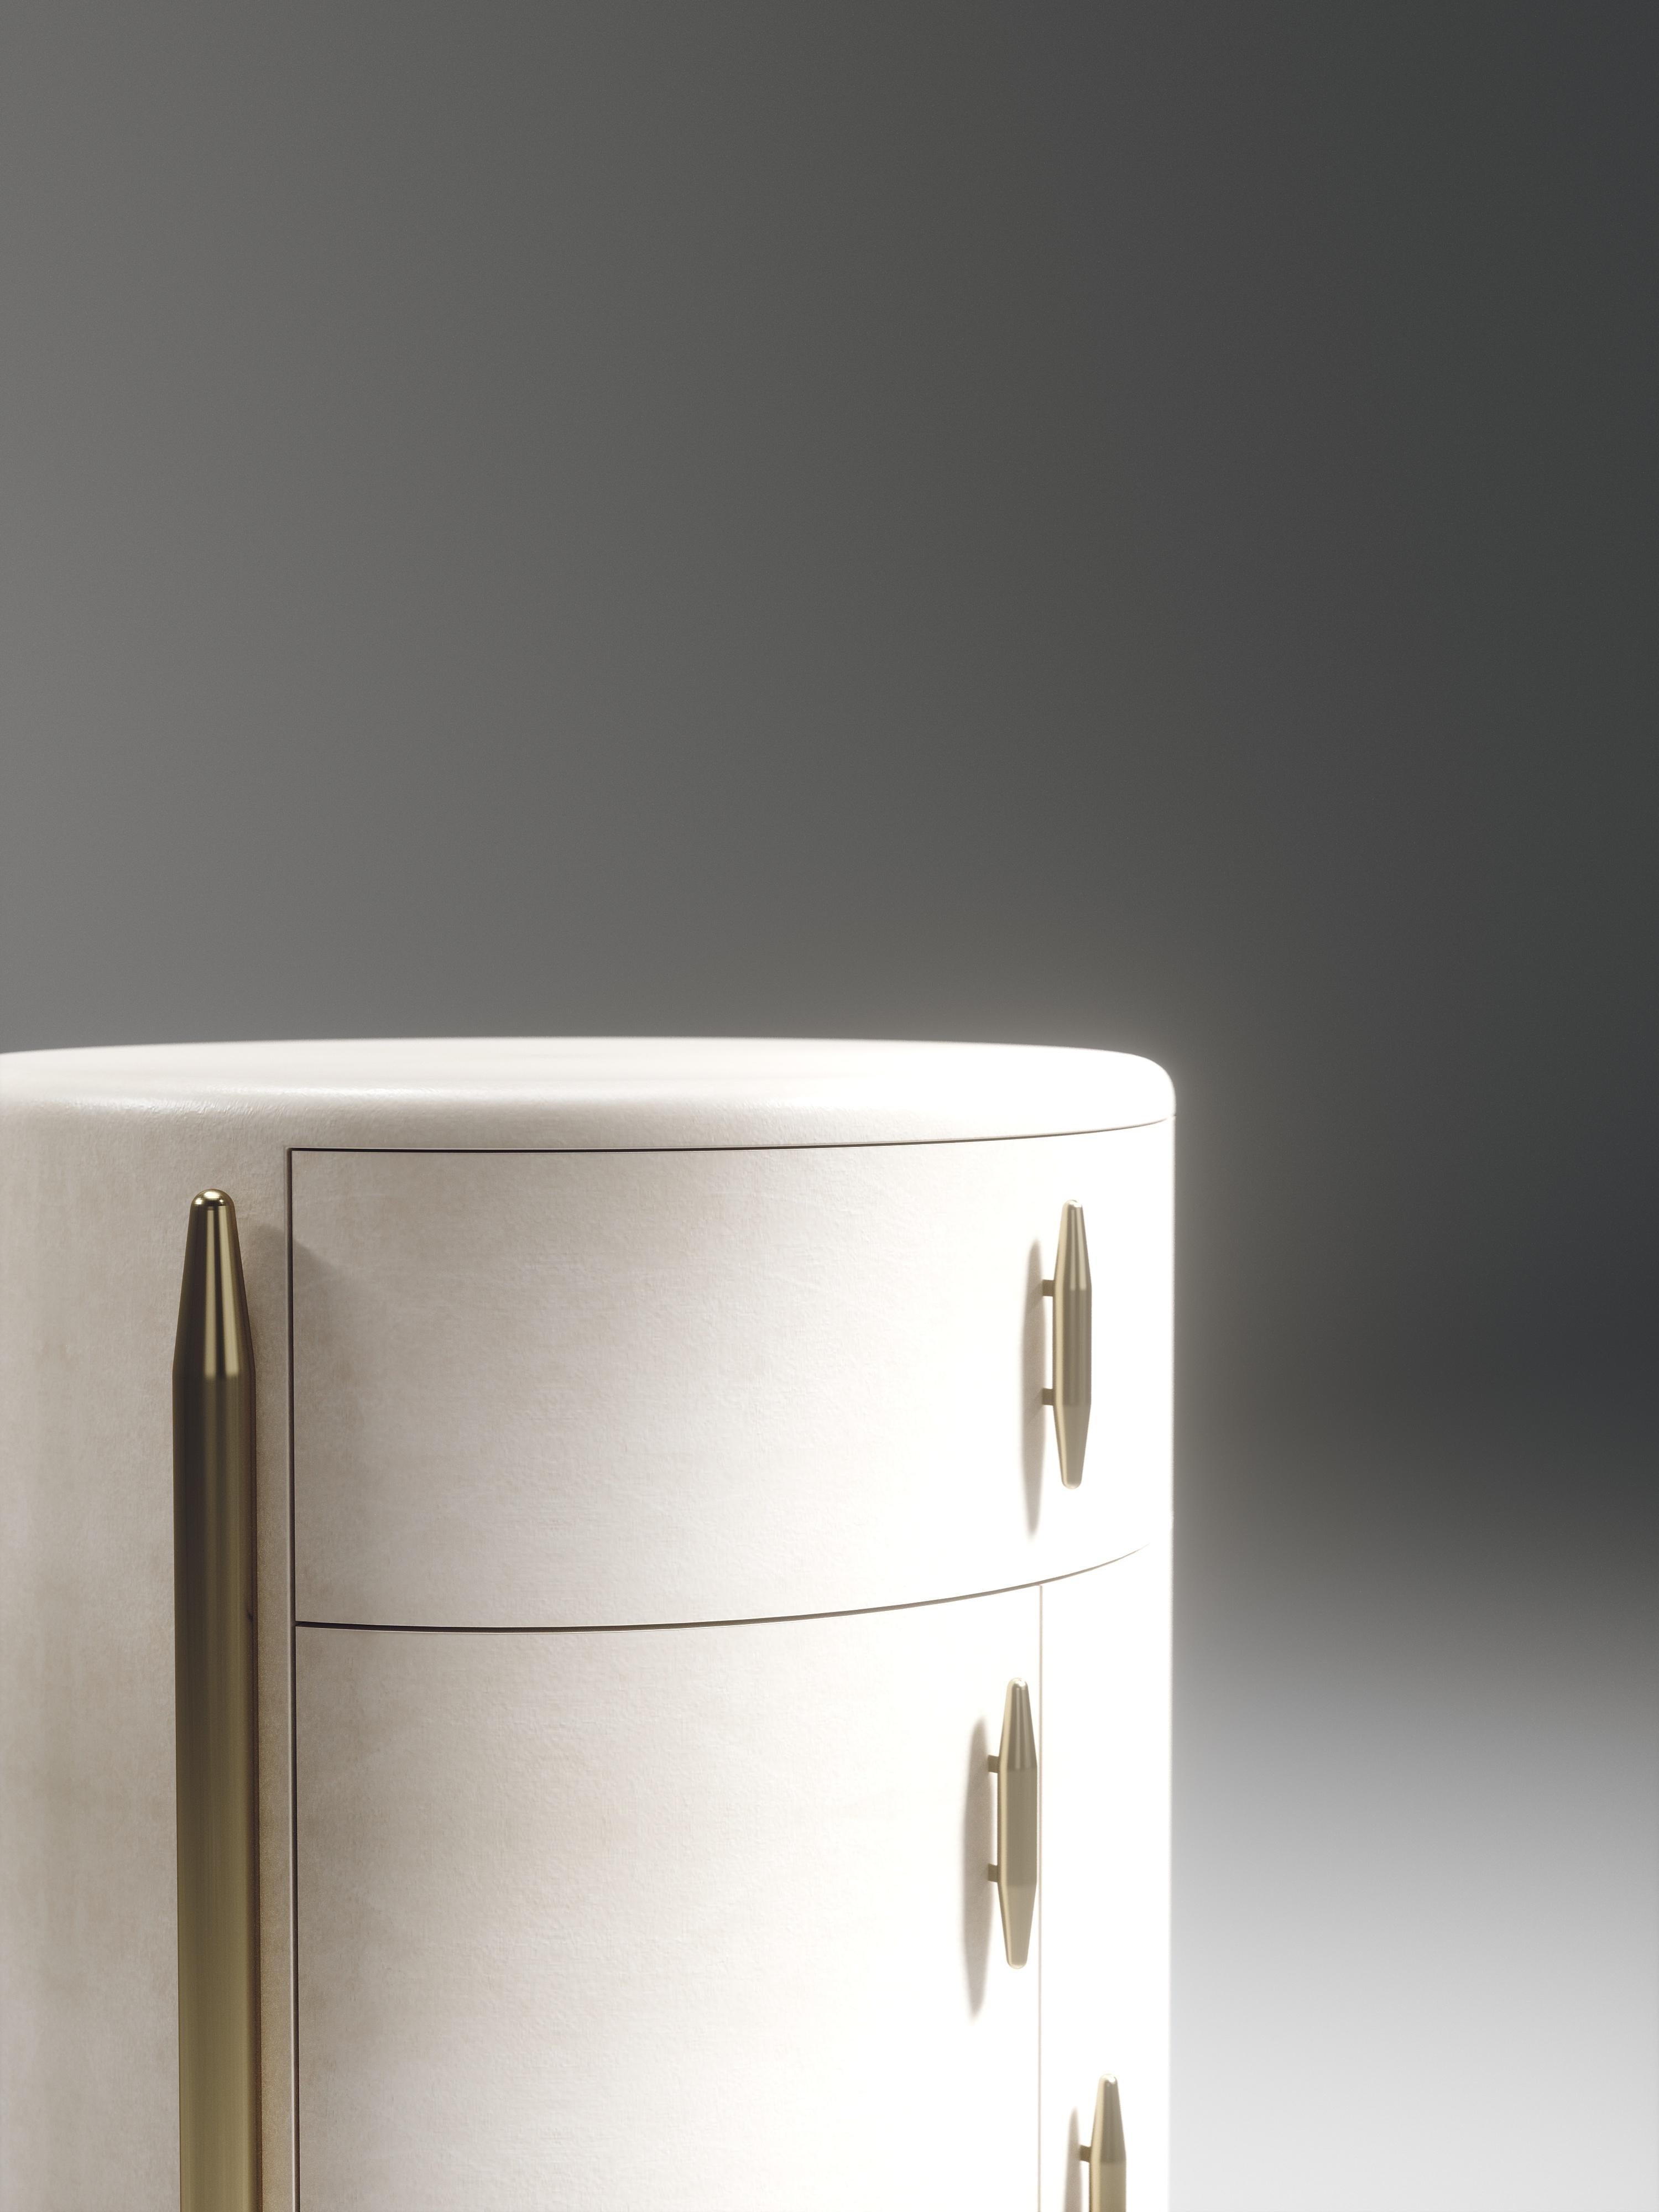 The Dandy round bedside table by Kifu Paris is an elegant and a luxurious home accent, inlaid in cream parchment with bronze-patina brass details. This piece includes 1 drawer total and a cabinet below; the interiors are inlaid in gemelina wood